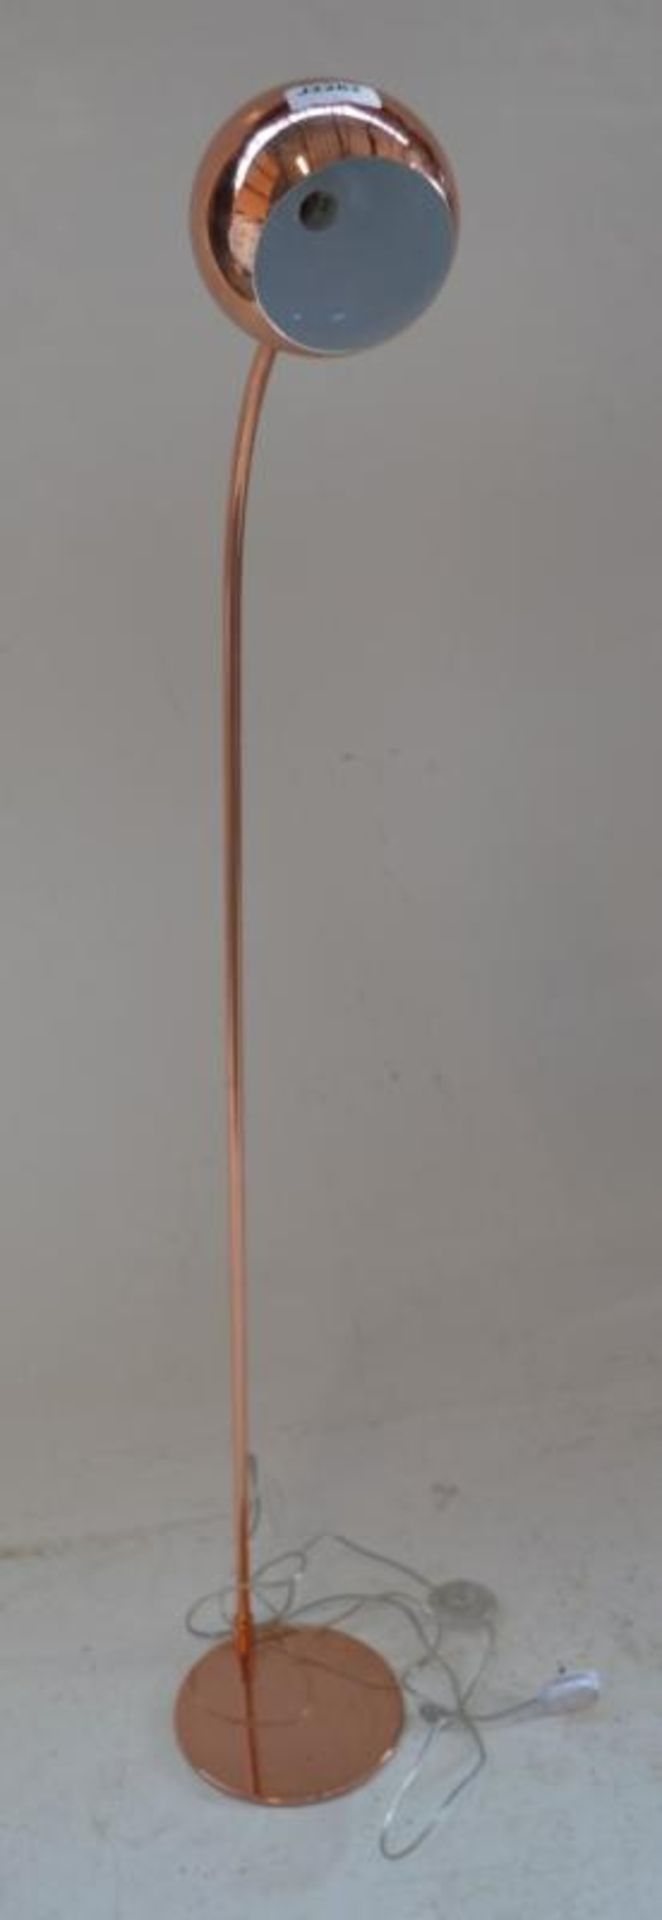 1 x Ex Display 1 Light Magnetic Head Floor Lamp Copper - CL364 - Ref:WH- J2282 - Location: Altrincha - Image 2 of 4